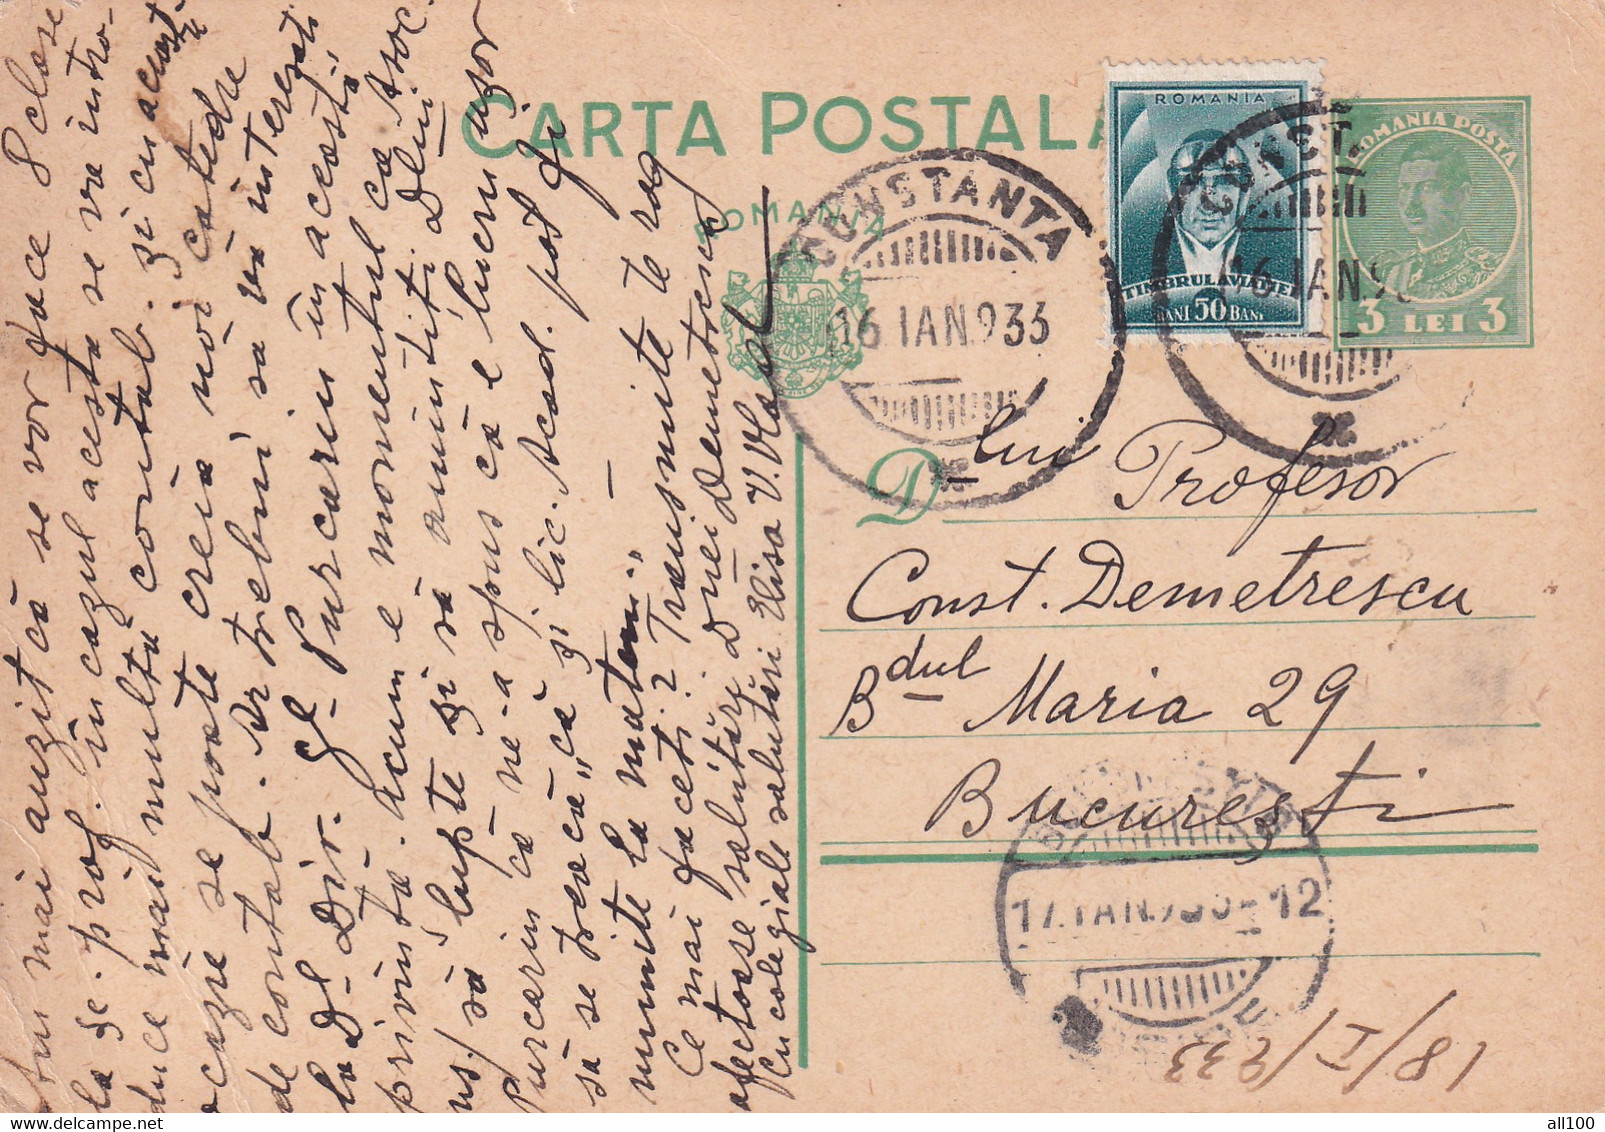 A16496-  CARTA POSTALA SENT FROM CONSTANTA  TO BUCHAREST 1933 KING MICHAEL 3 LEI AVIATION STAMP POSTAL STATIONERY - Oblitérés